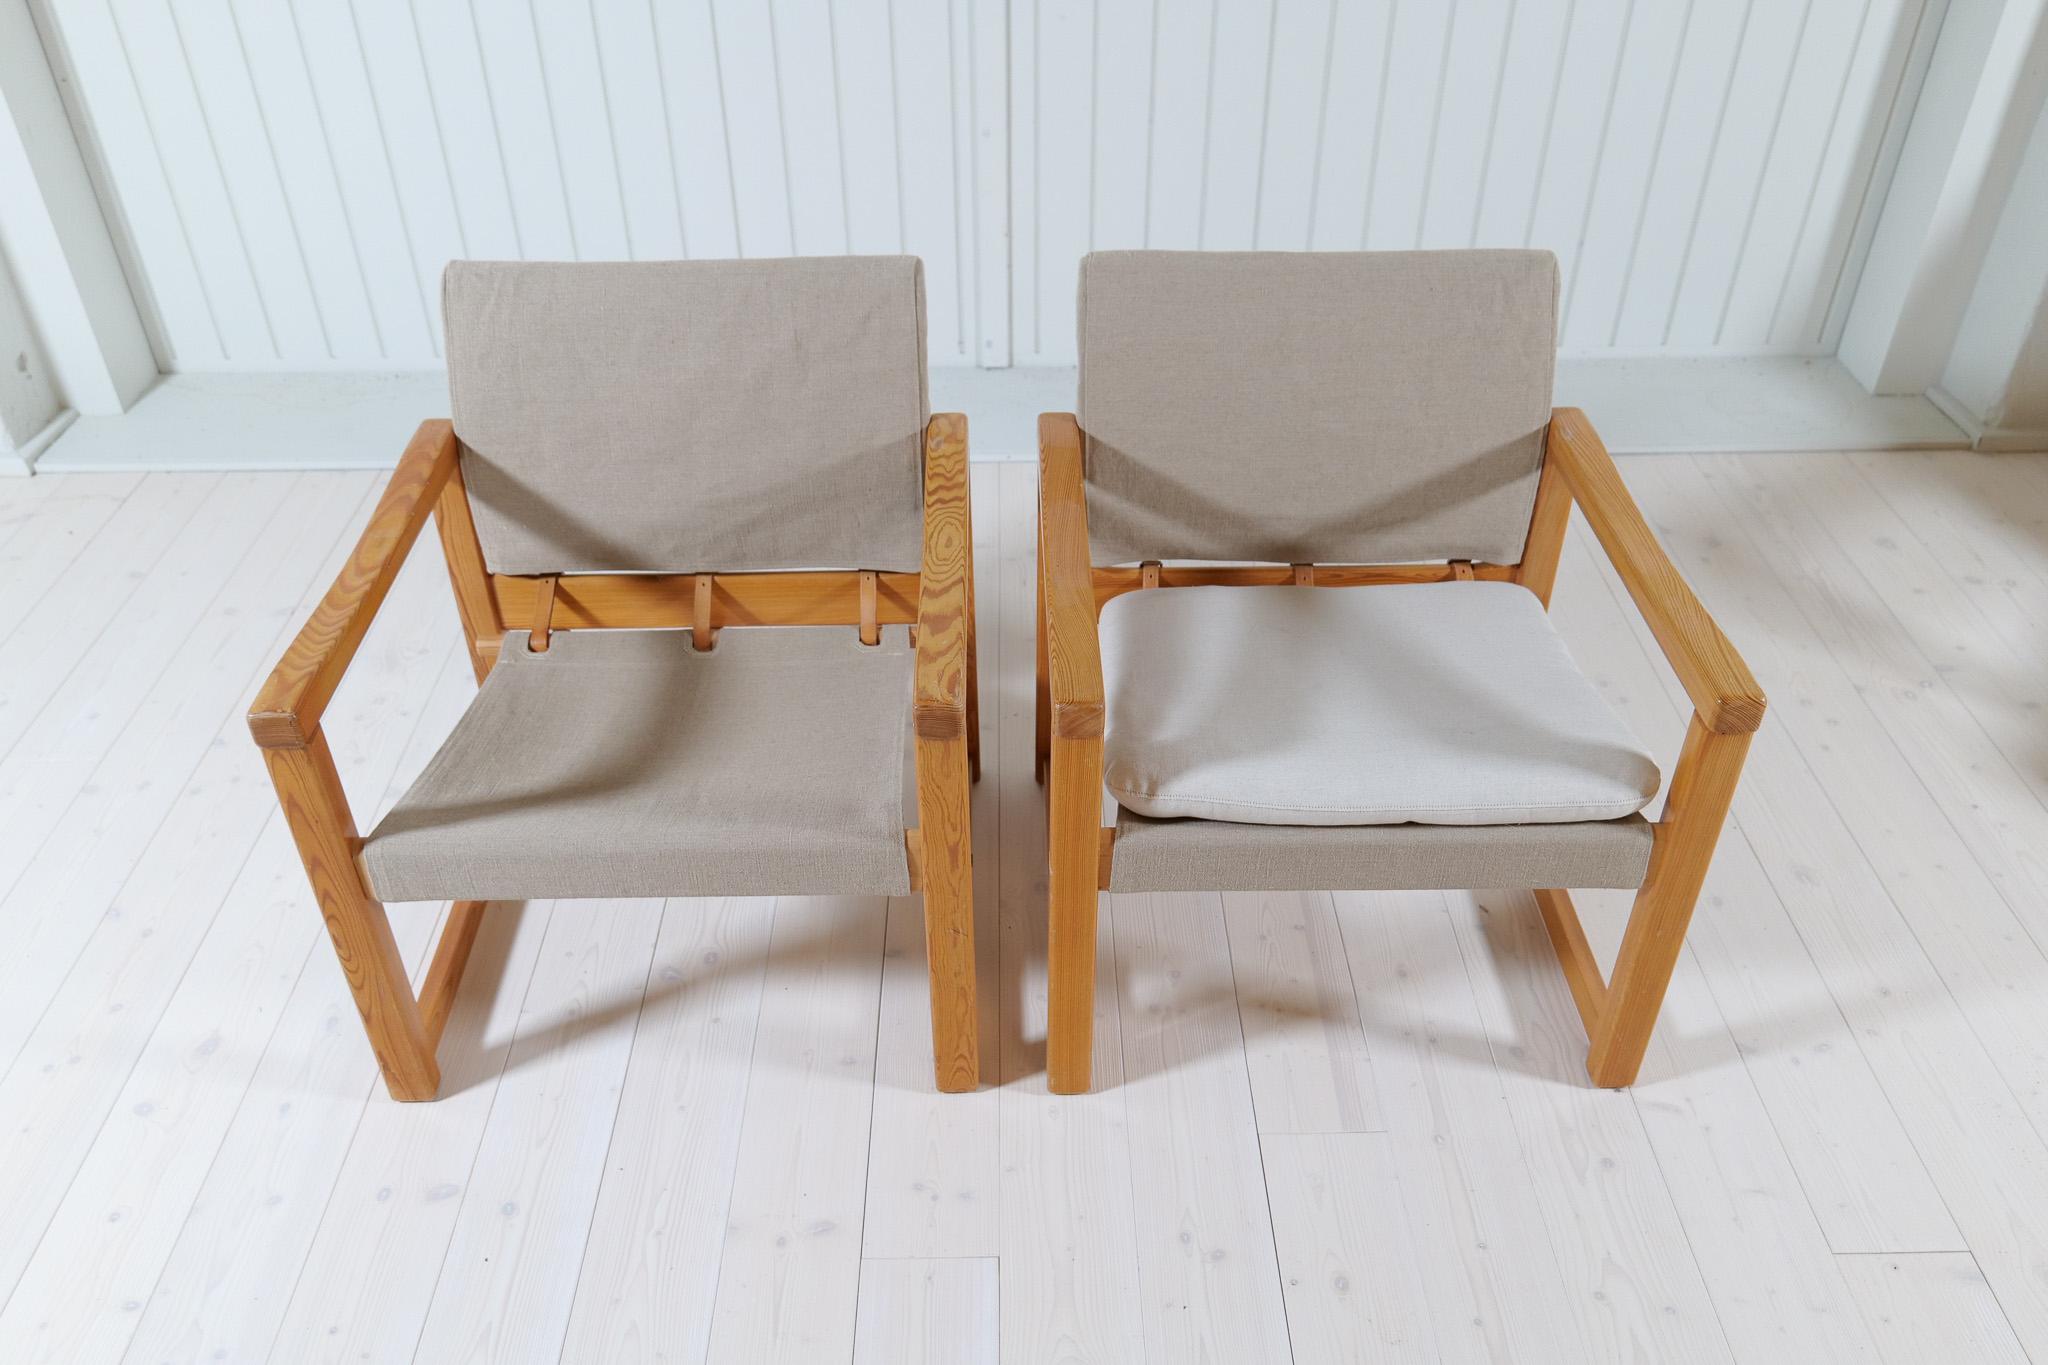 Midcentury Modern Karin Mobring Armchairs Model Diana by Ikea in Sweden, 1970s For Sale 3